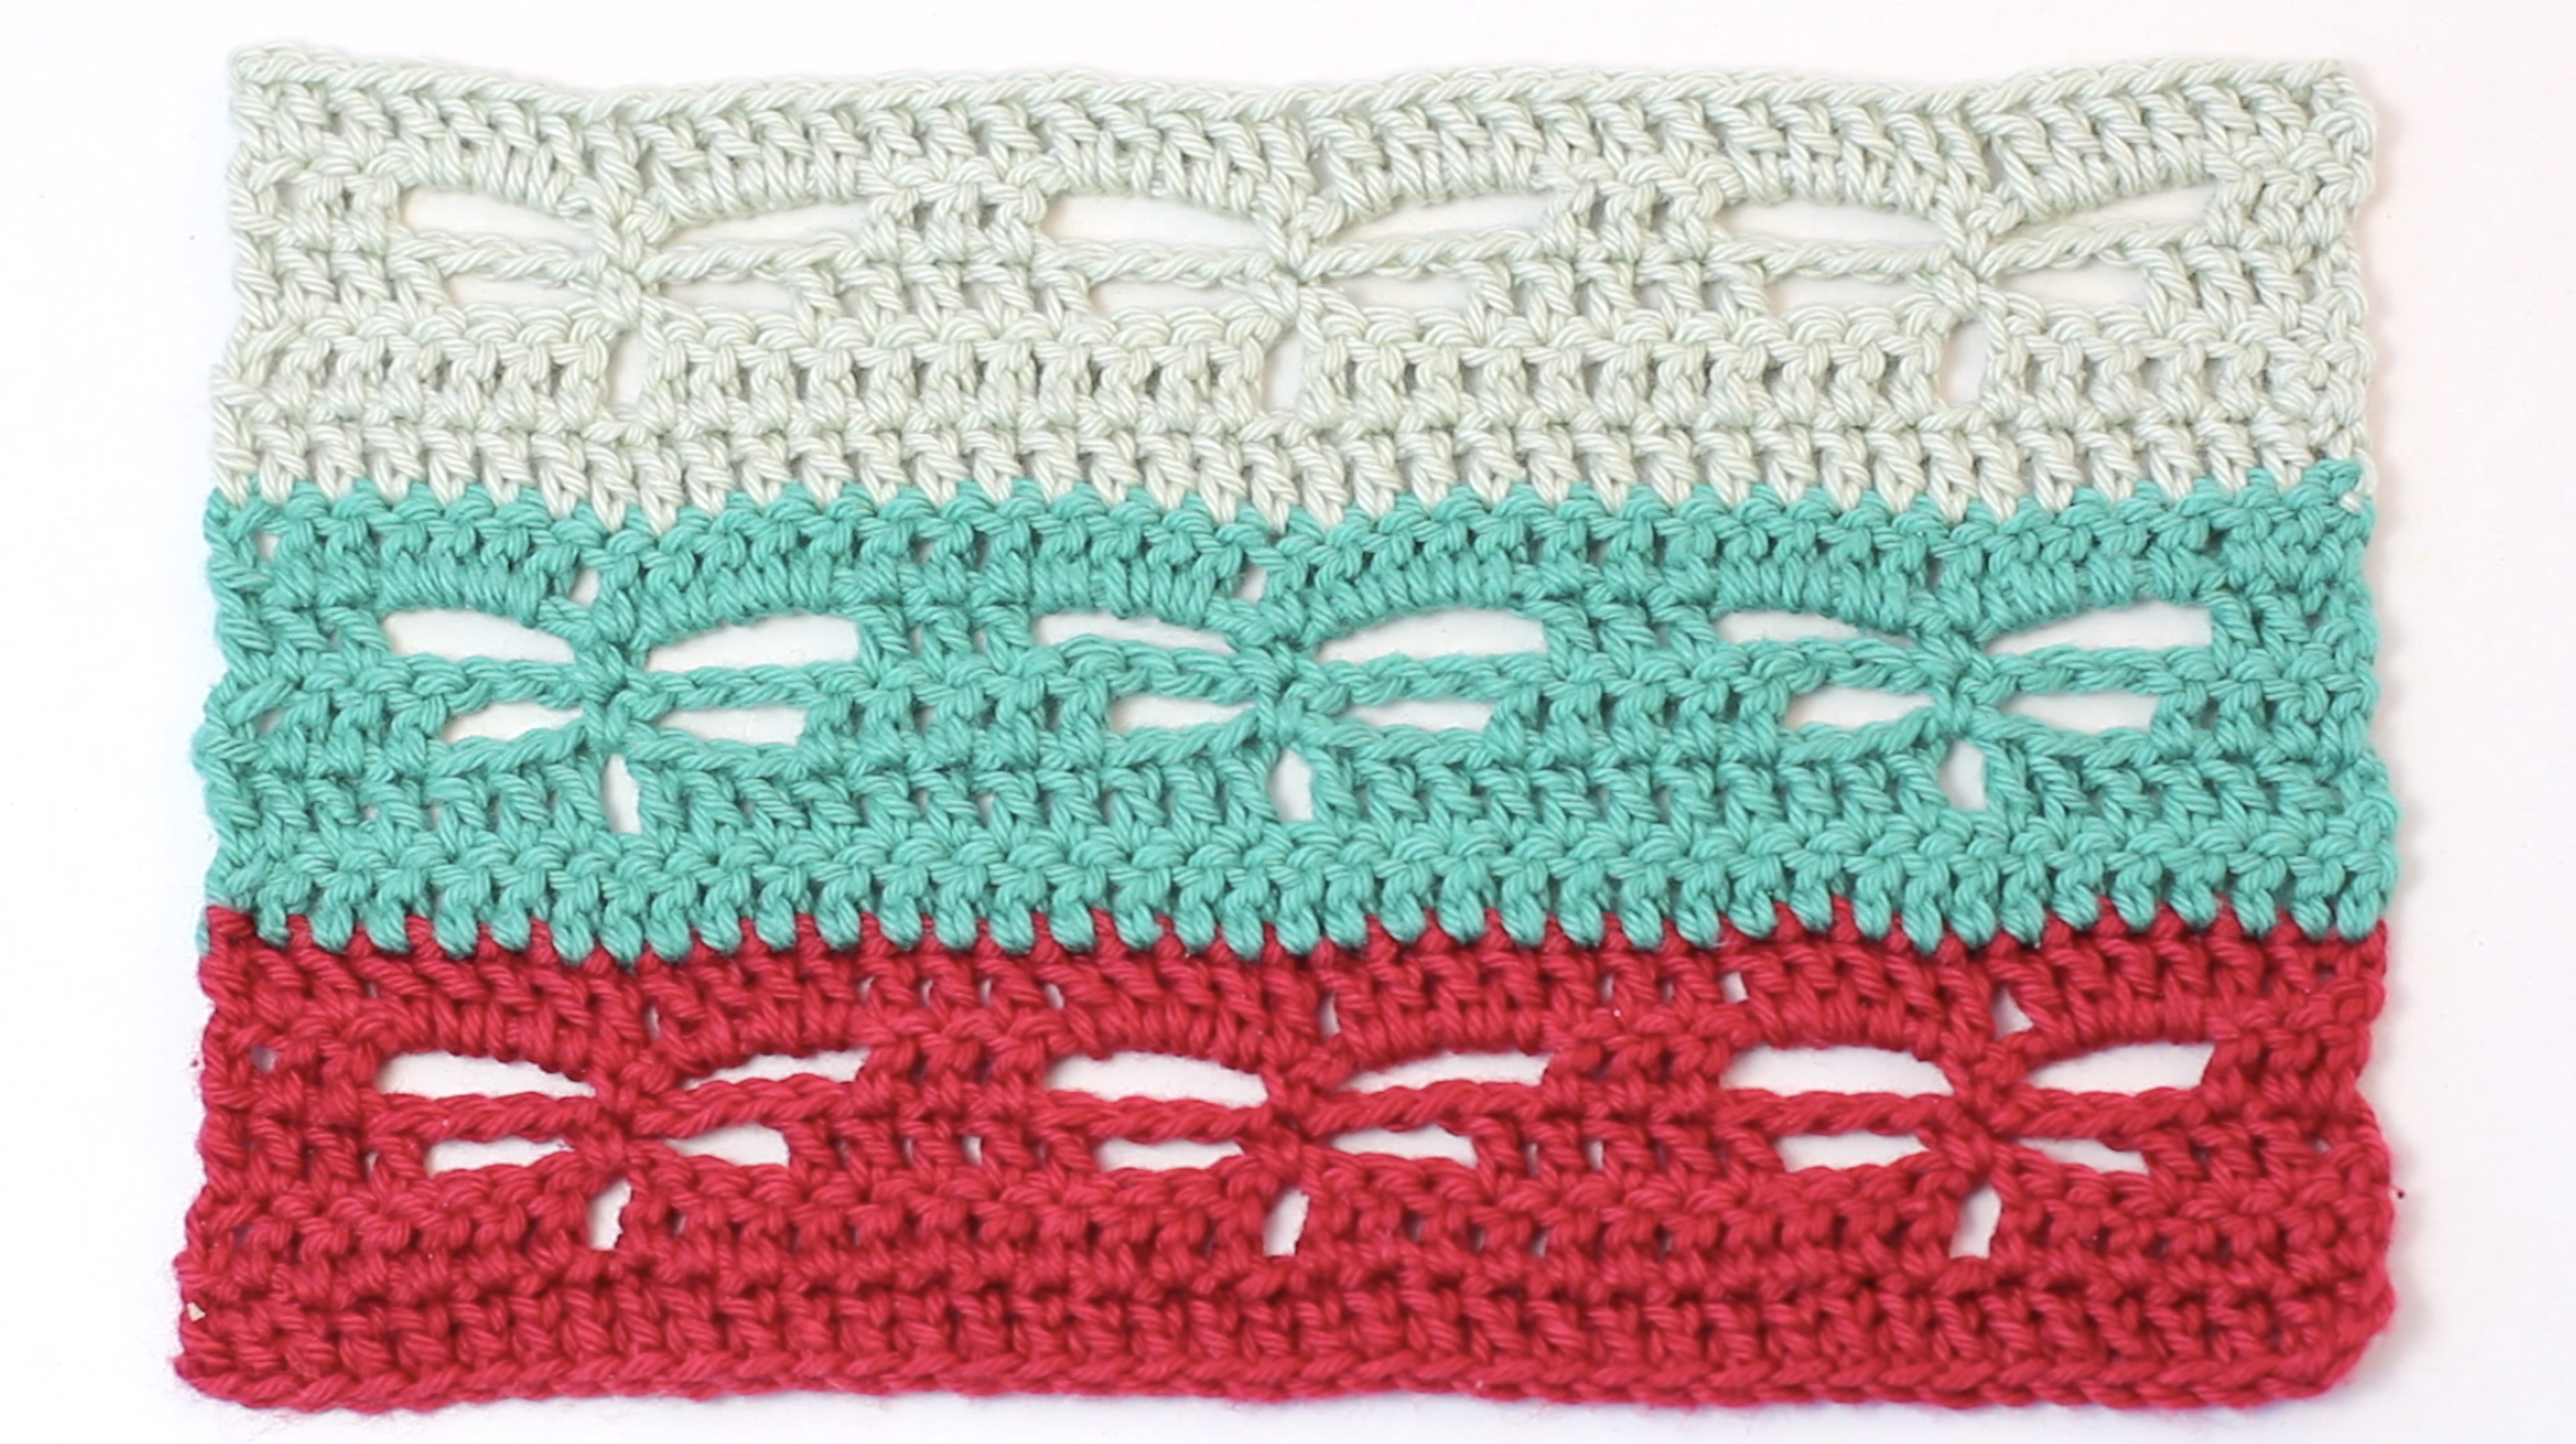 Crochet Stitches Patterns A Guide To Crochet Stitches Lovecrochet